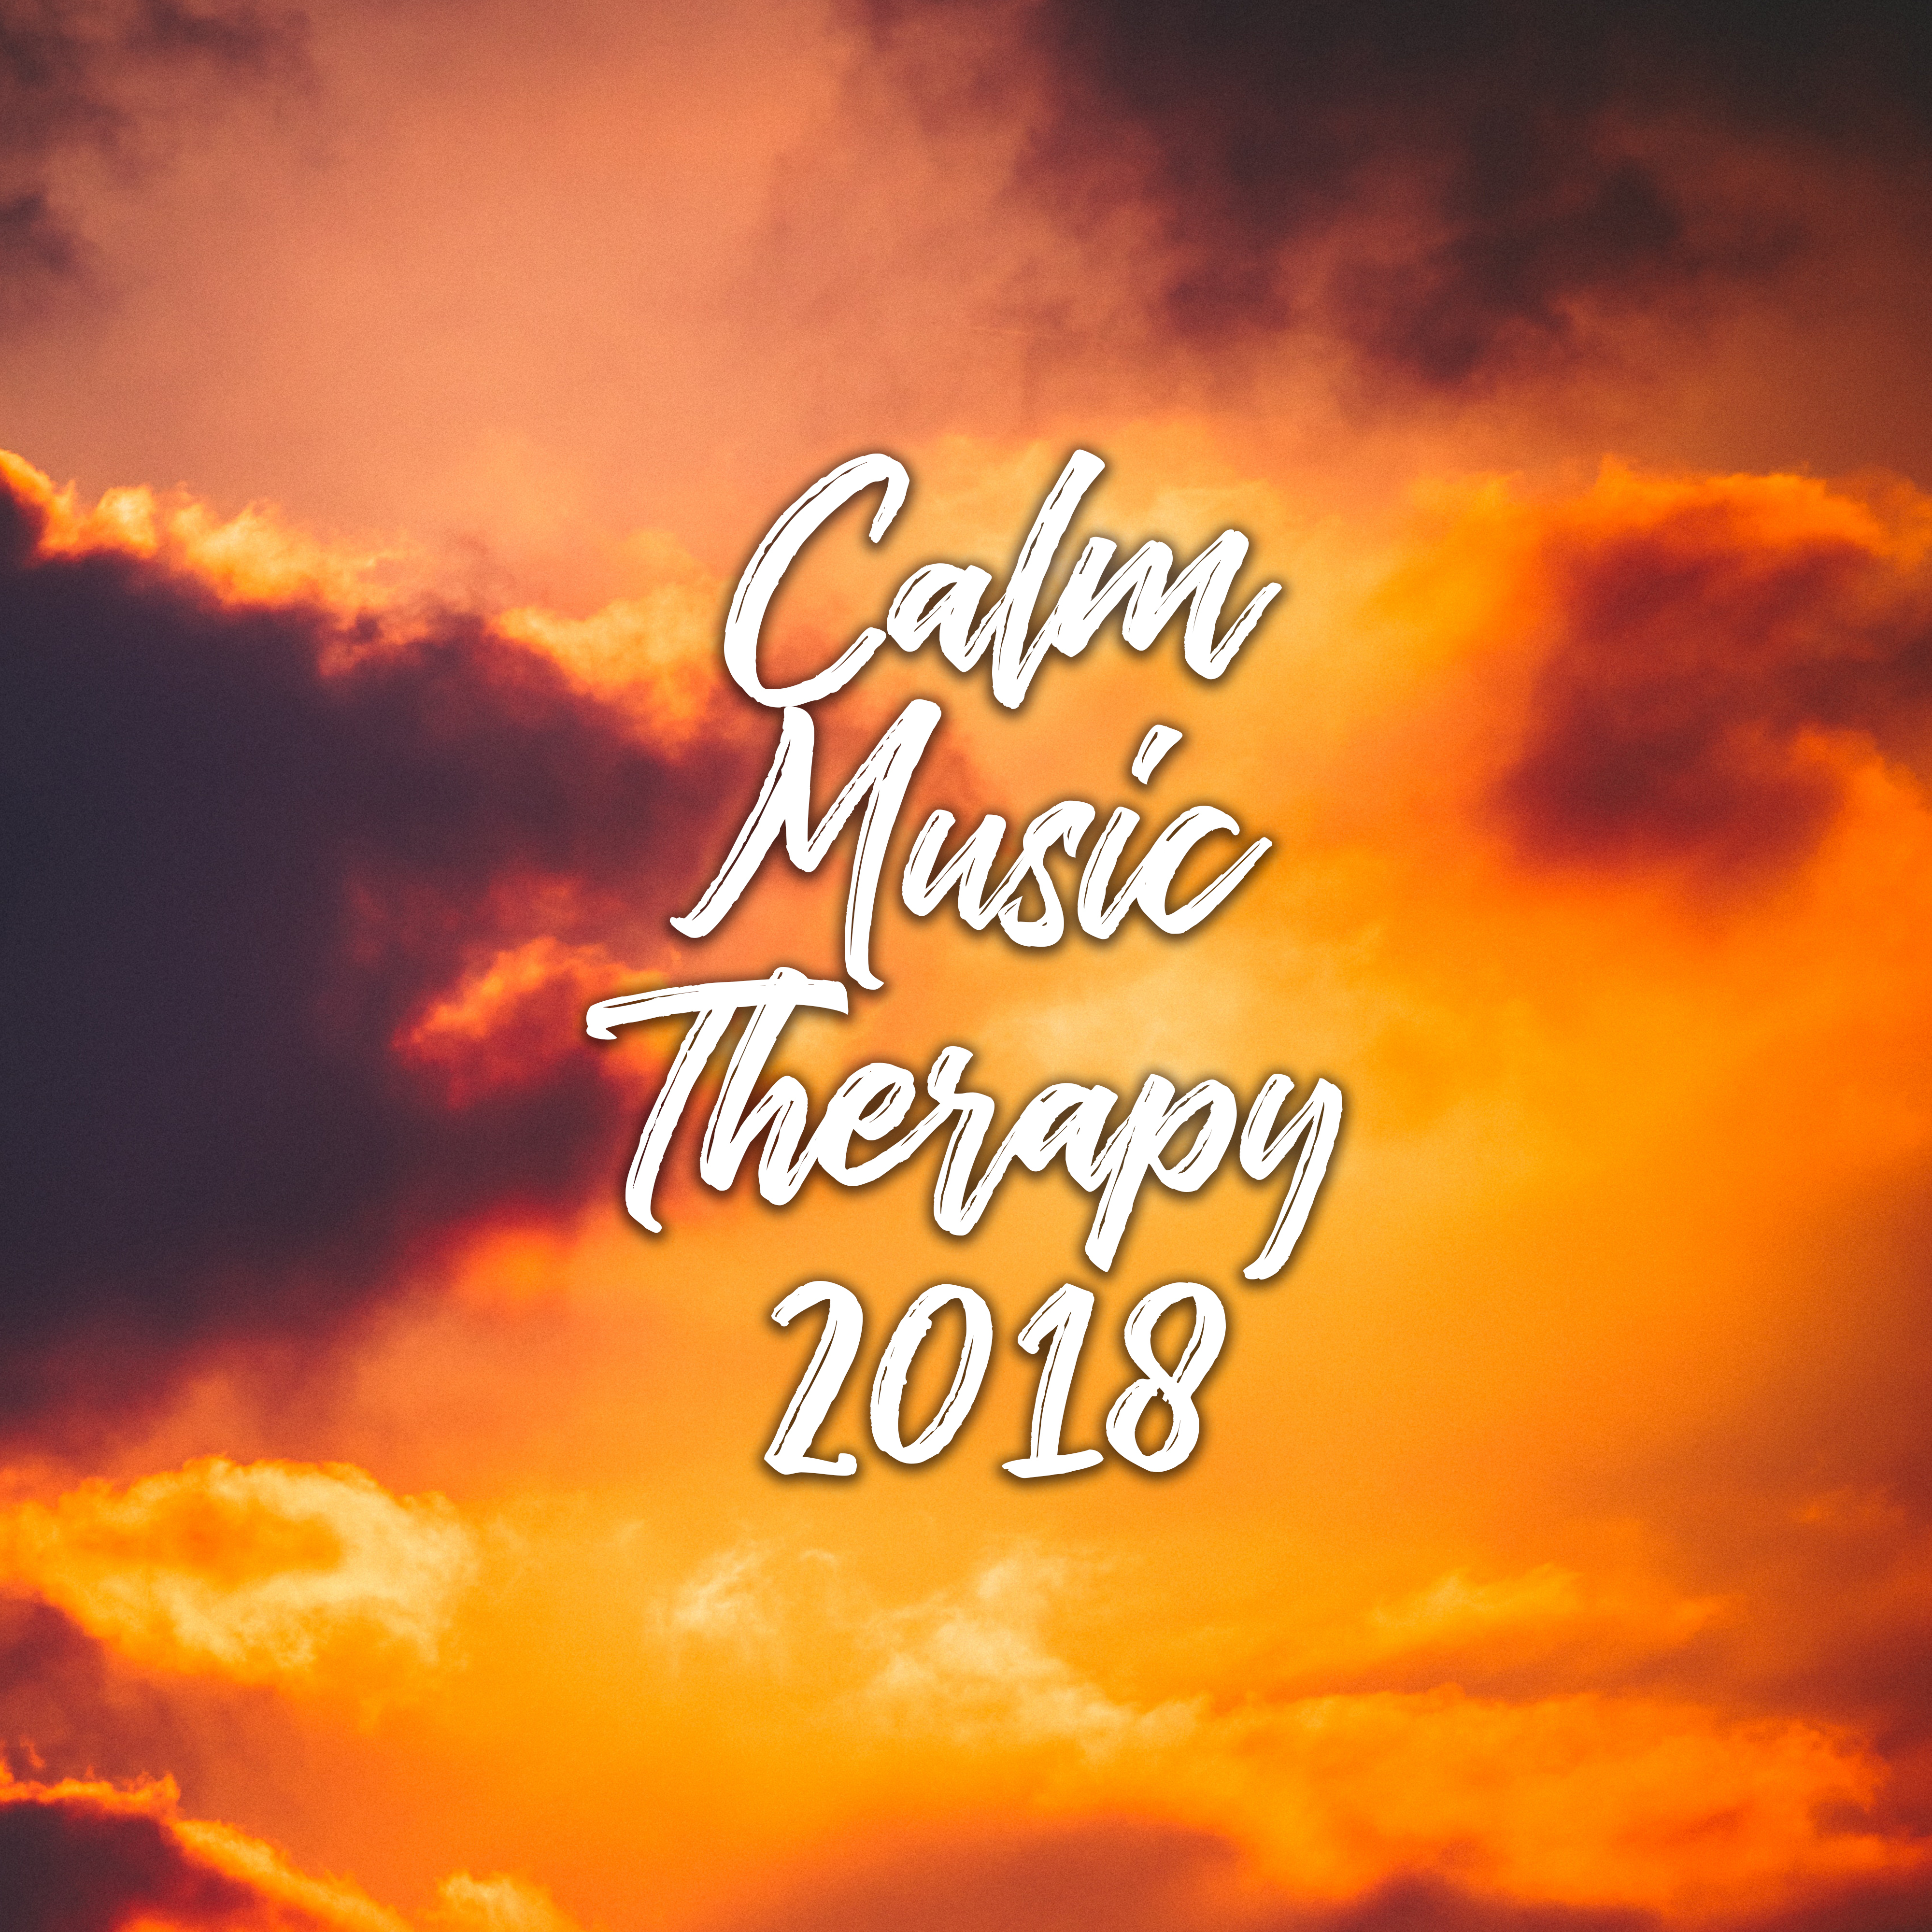 Calm Music Therapy 2018